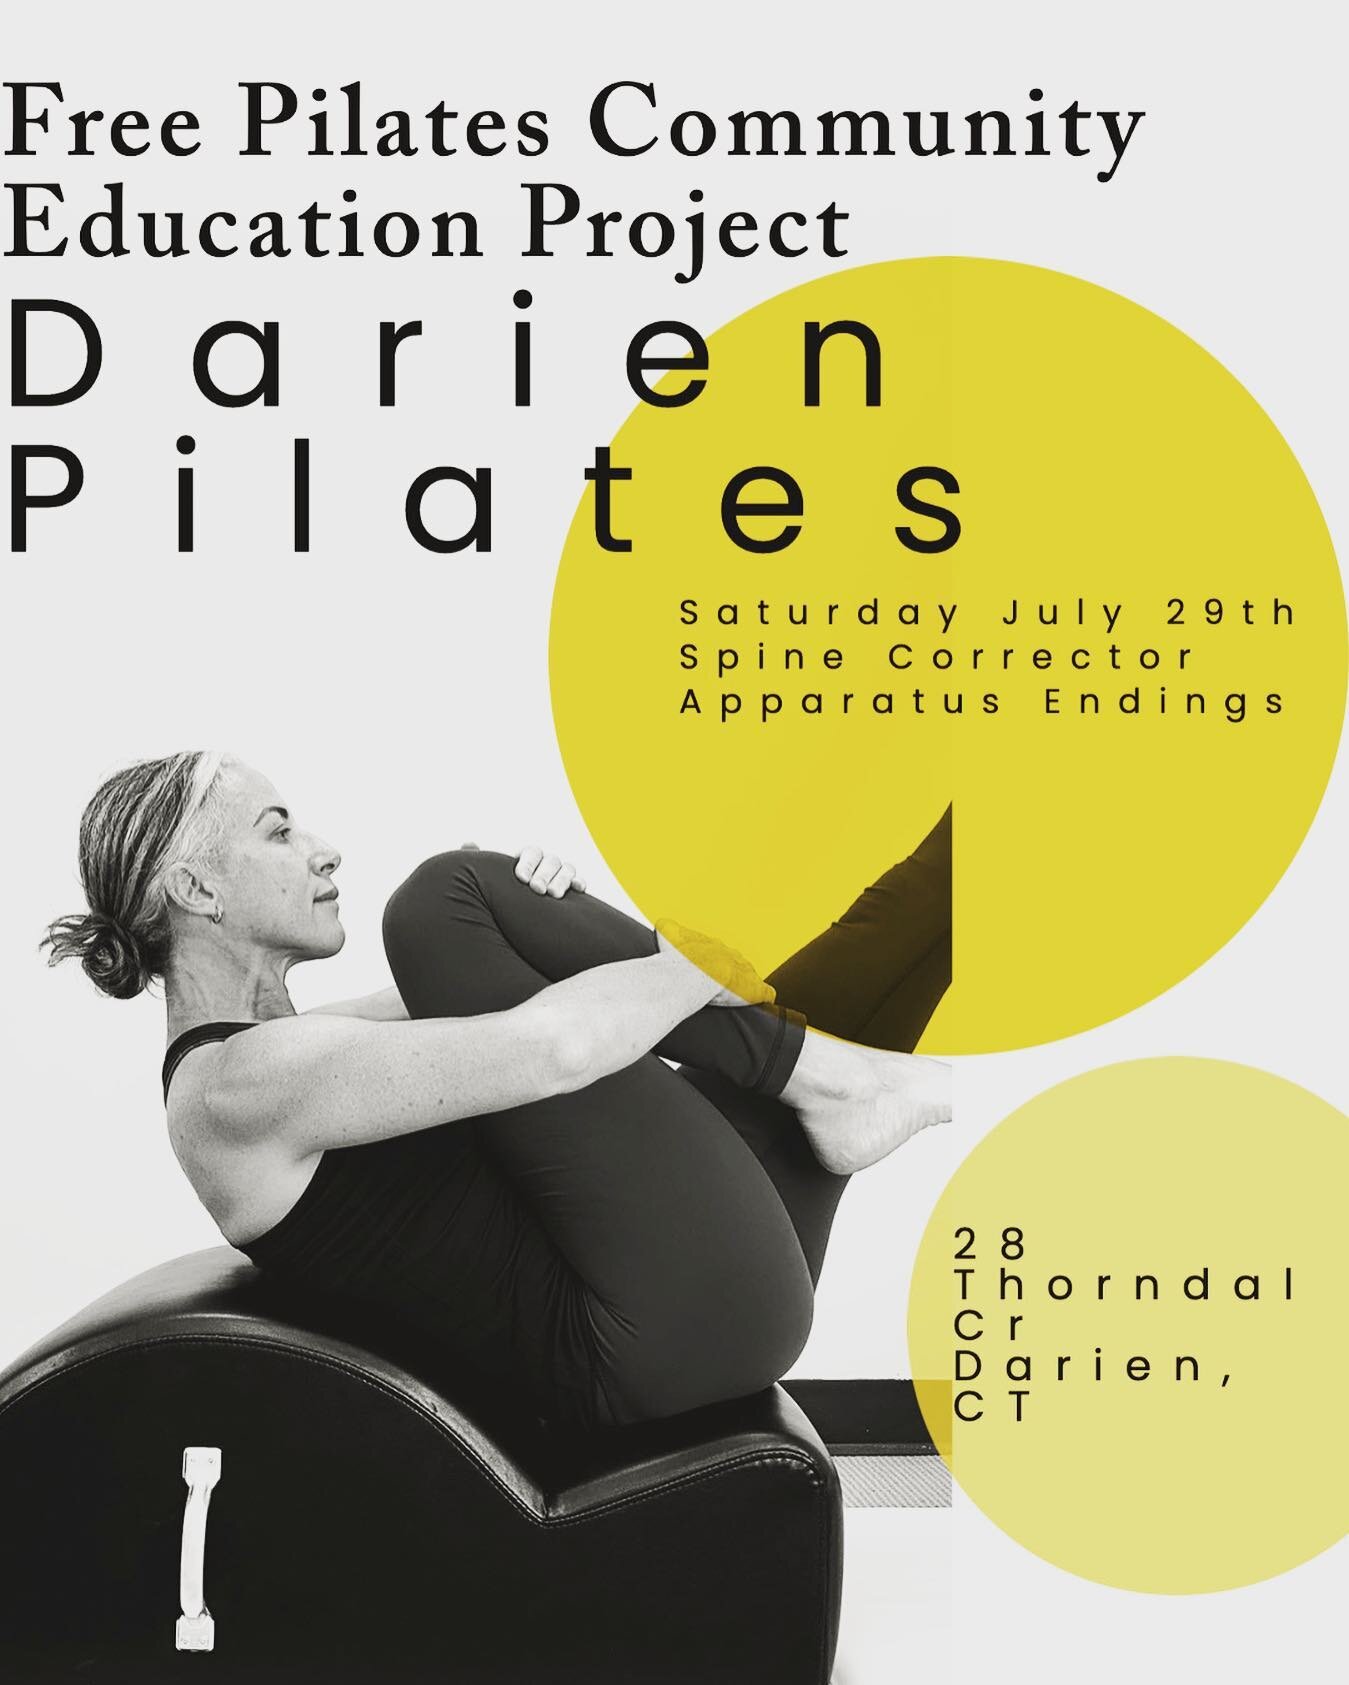 Join us this weekend at Darien Pilates in Connecticut for our Free Pilates Community Education Project.

Learn how to move and teach part or and entire lesson on the Spine Corrector. Then get your notebook ready for ways to end lessons on the apparat